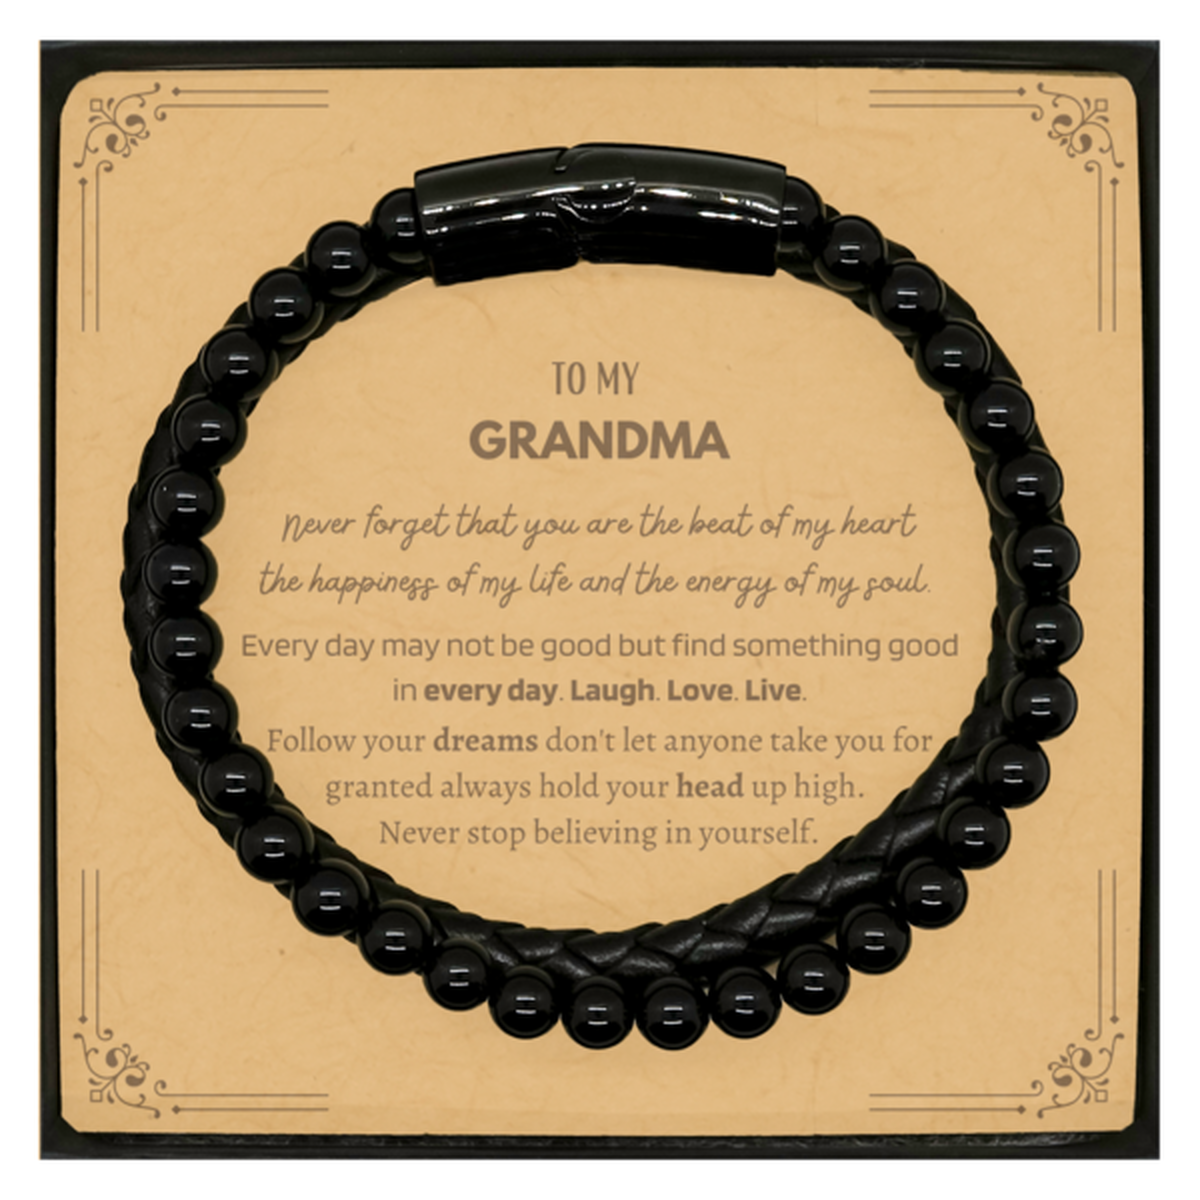 To My Grandma Message Card Gifts, Christmas Grandma Stone Leather Bracelets Present, Birthday Unique Motivational For Grandma, To My Grandma Never forget that you are the beat of my heart the happiness of my life and the energy of my soul